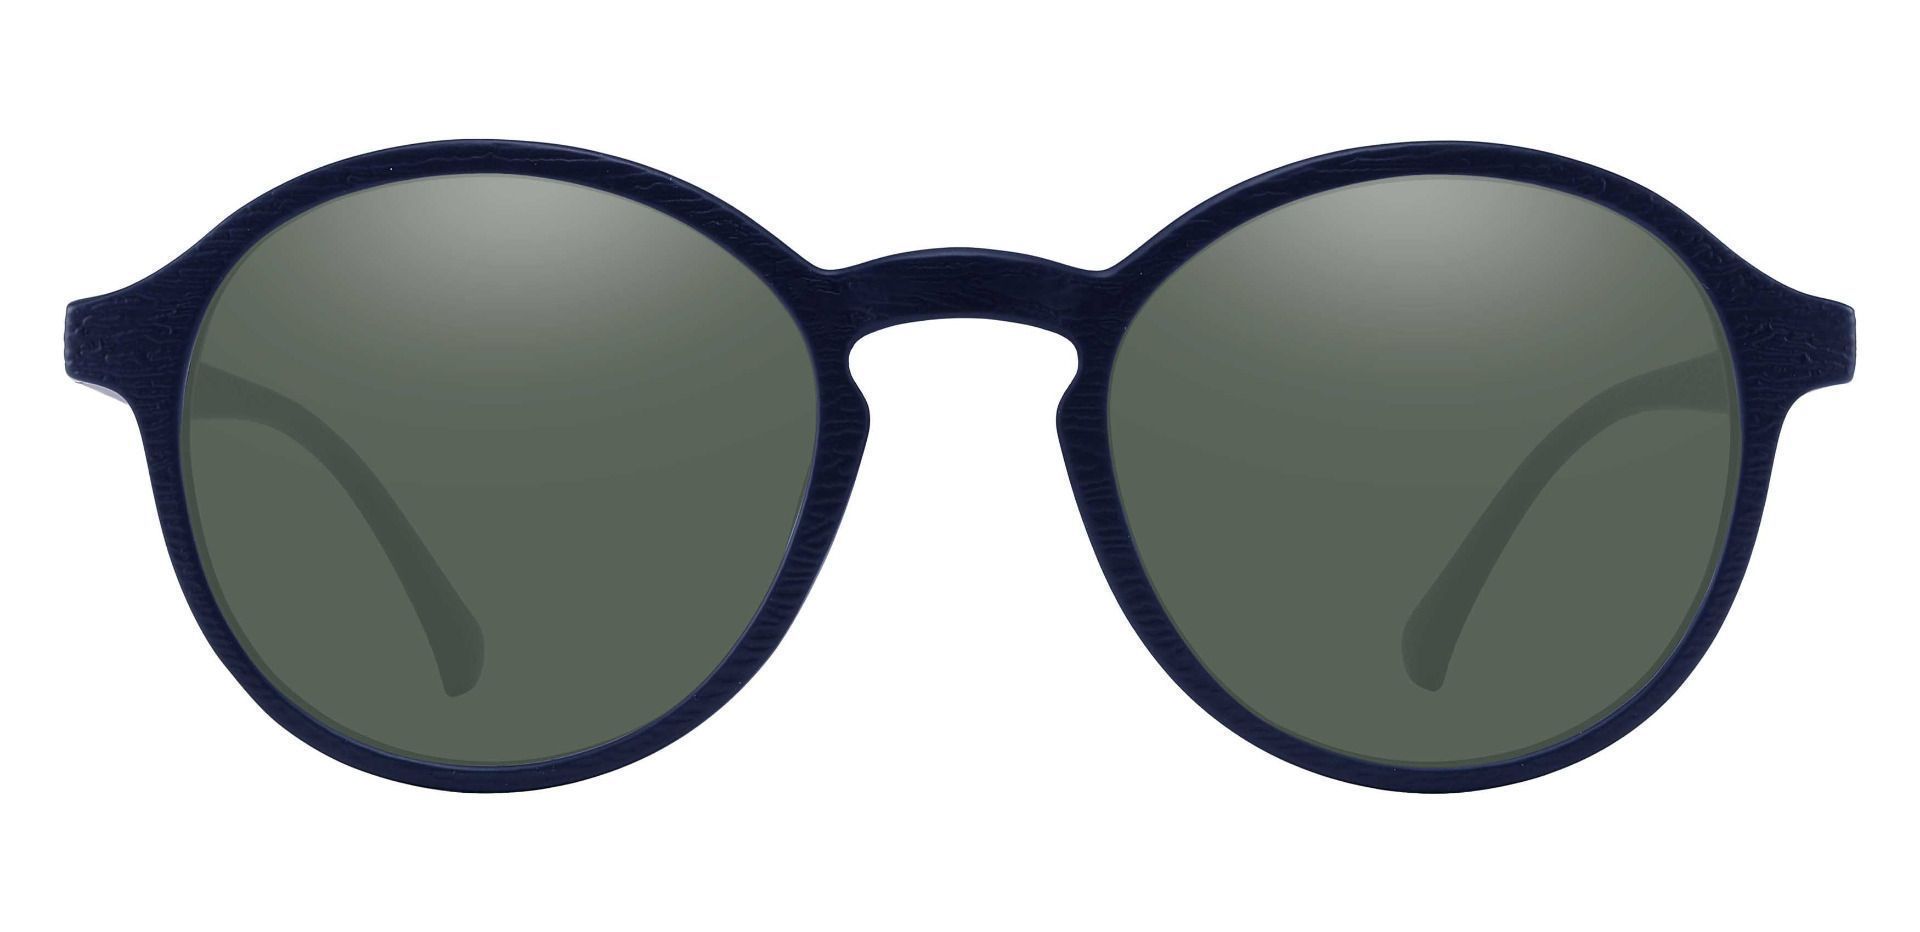 Whitney Round Non-Rx Sunglasses - Blue Frame With Green Lenses